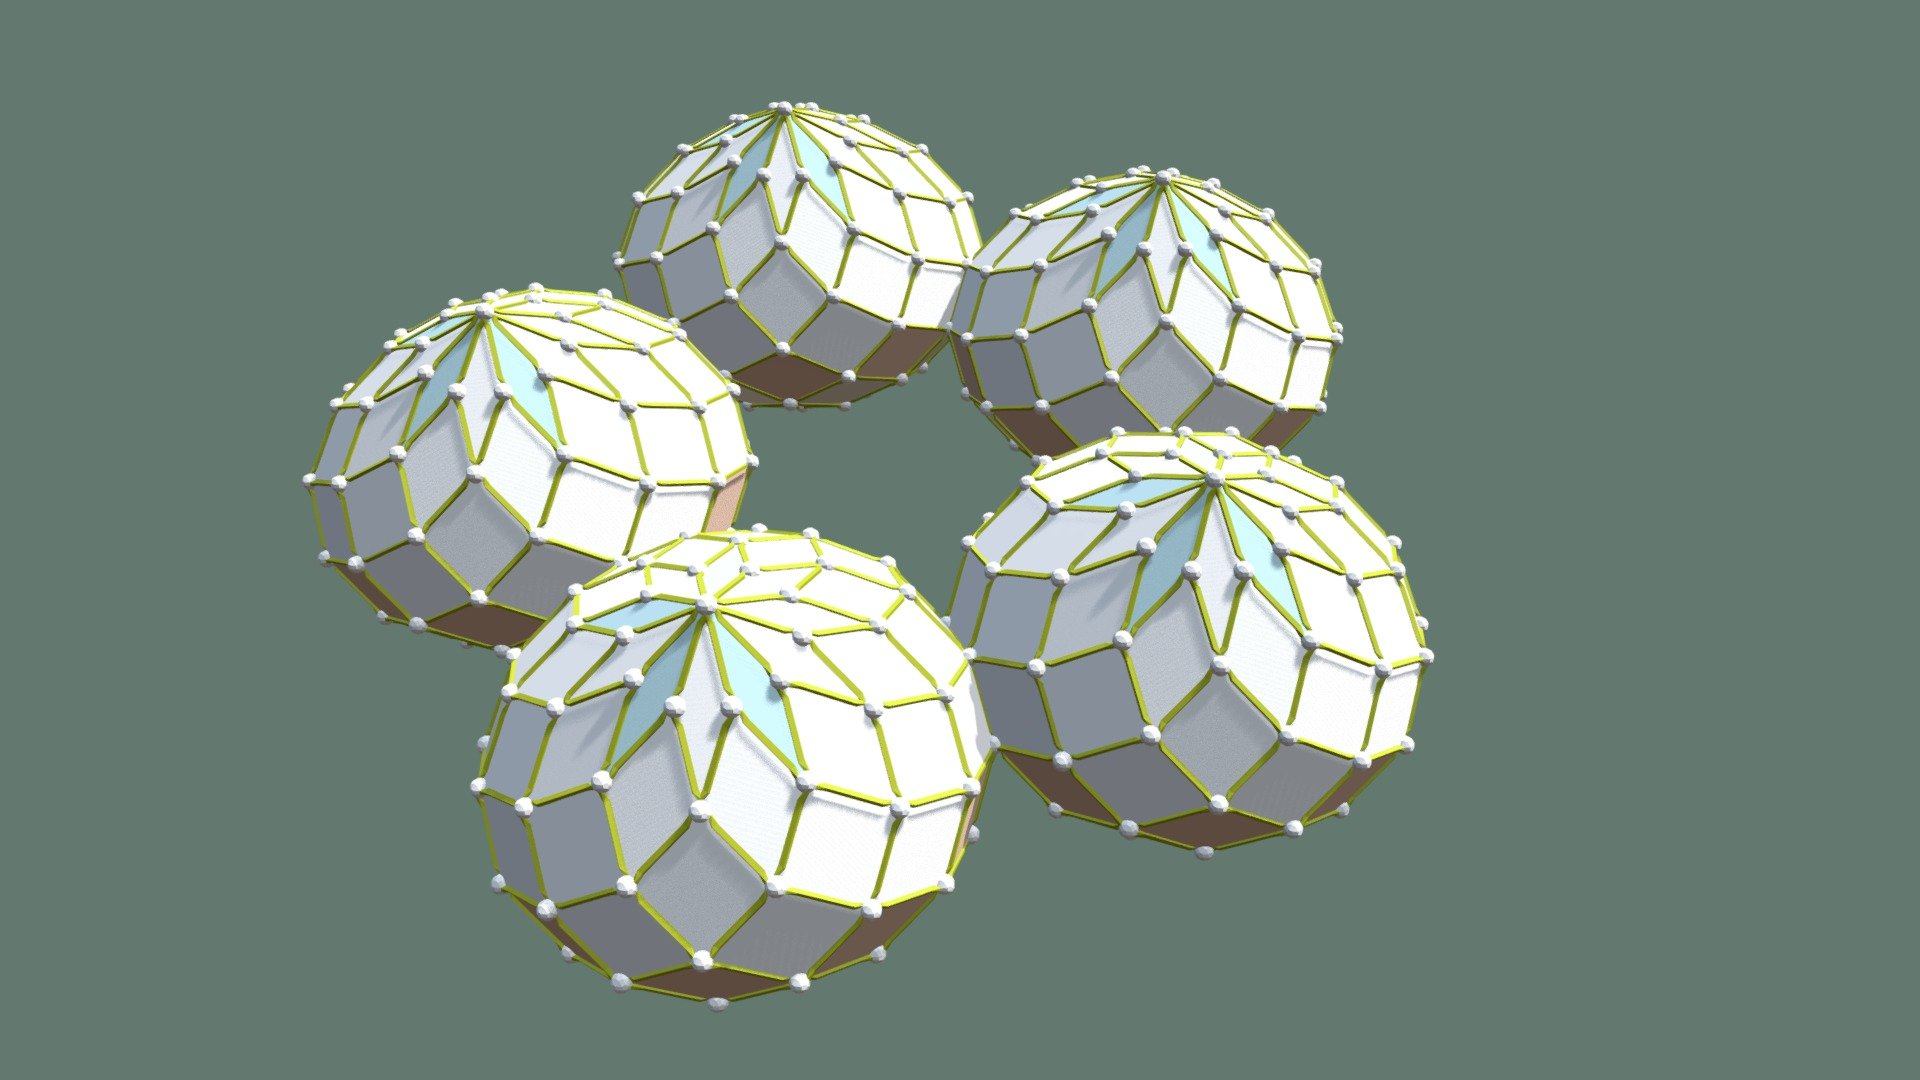 Each of the 5 zonohedra share a single face with their neighbor. Each zonohedron has 90 faces, 180 edges and 92 vertices.

This model was made with vZome. The vZome file is in the download 3d model